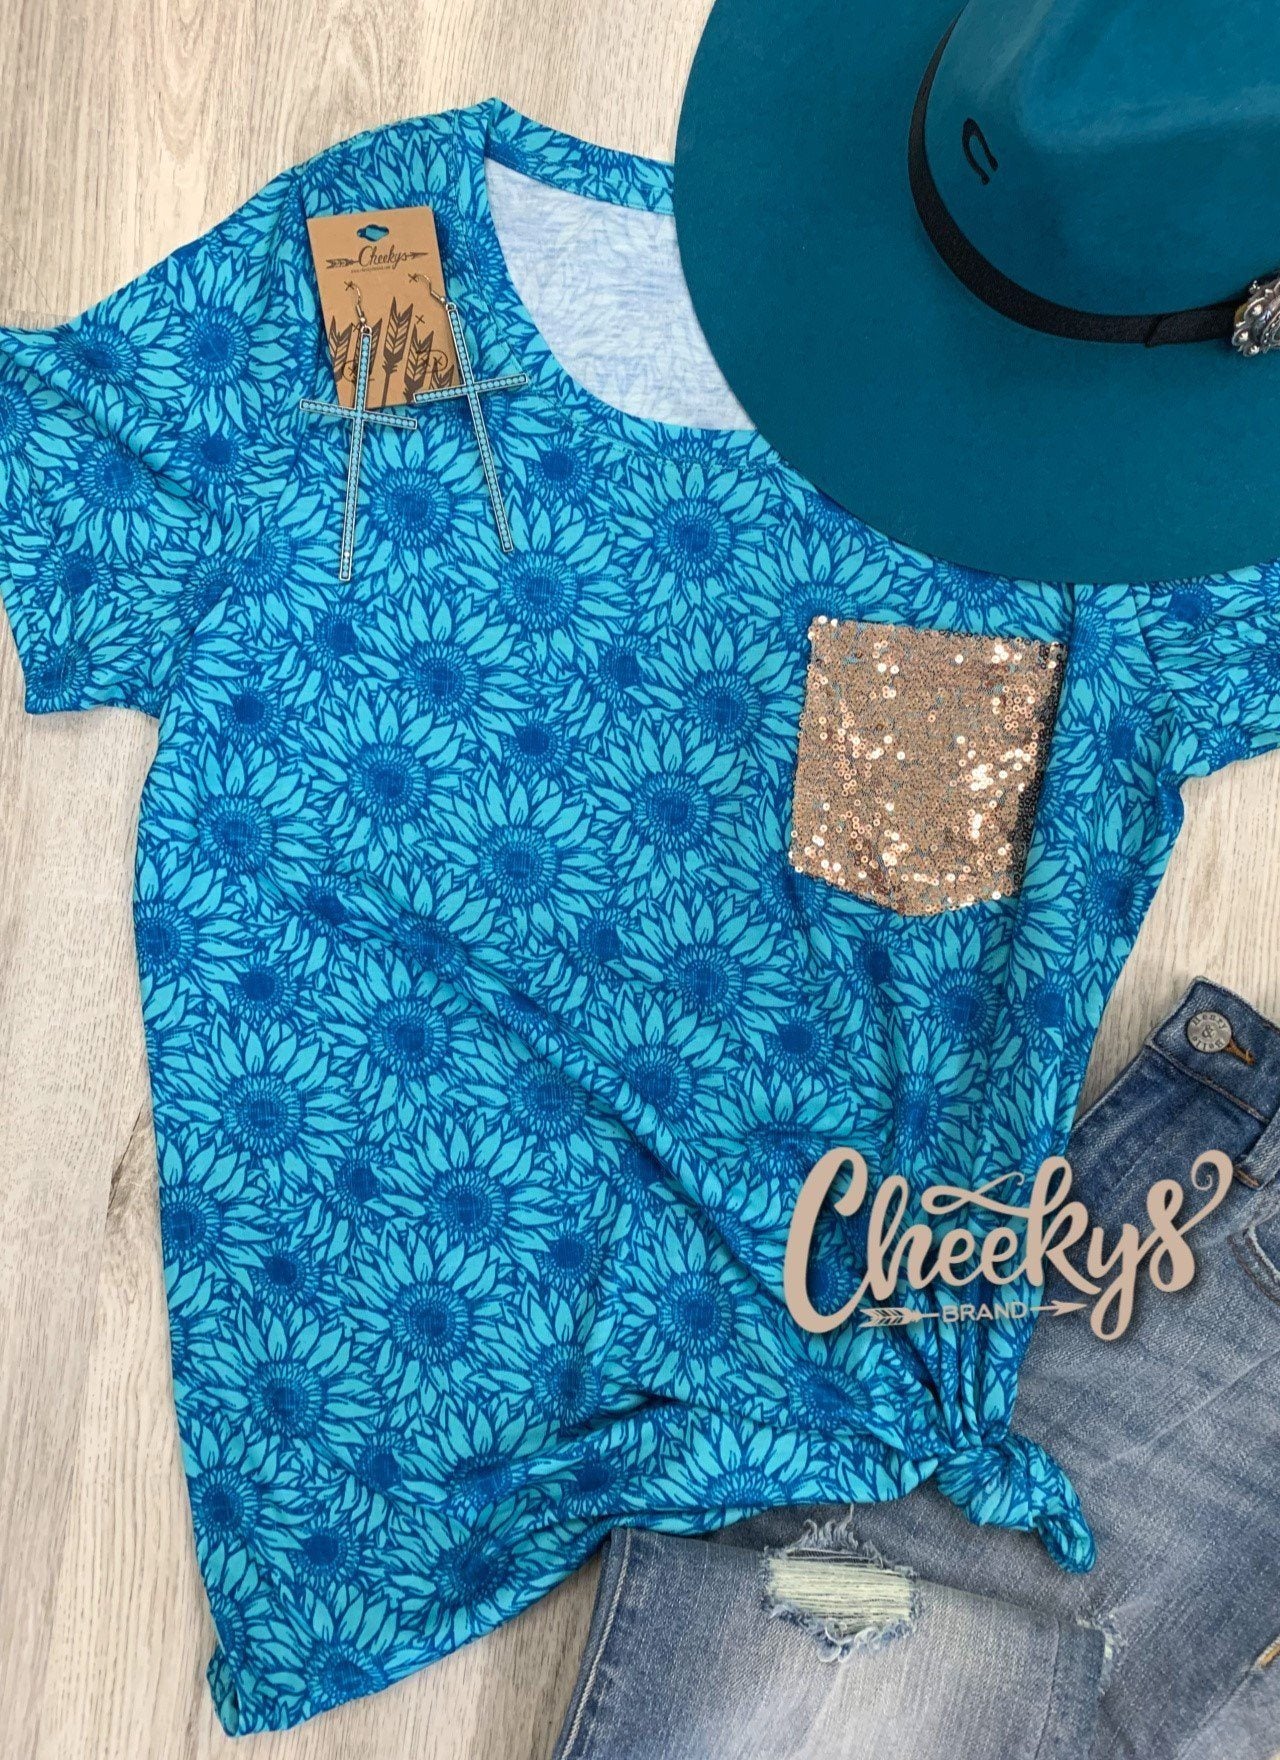 Blue Sunflower Scoop with Rose Gold Sequin Pocket Cheekys Apparel 23 